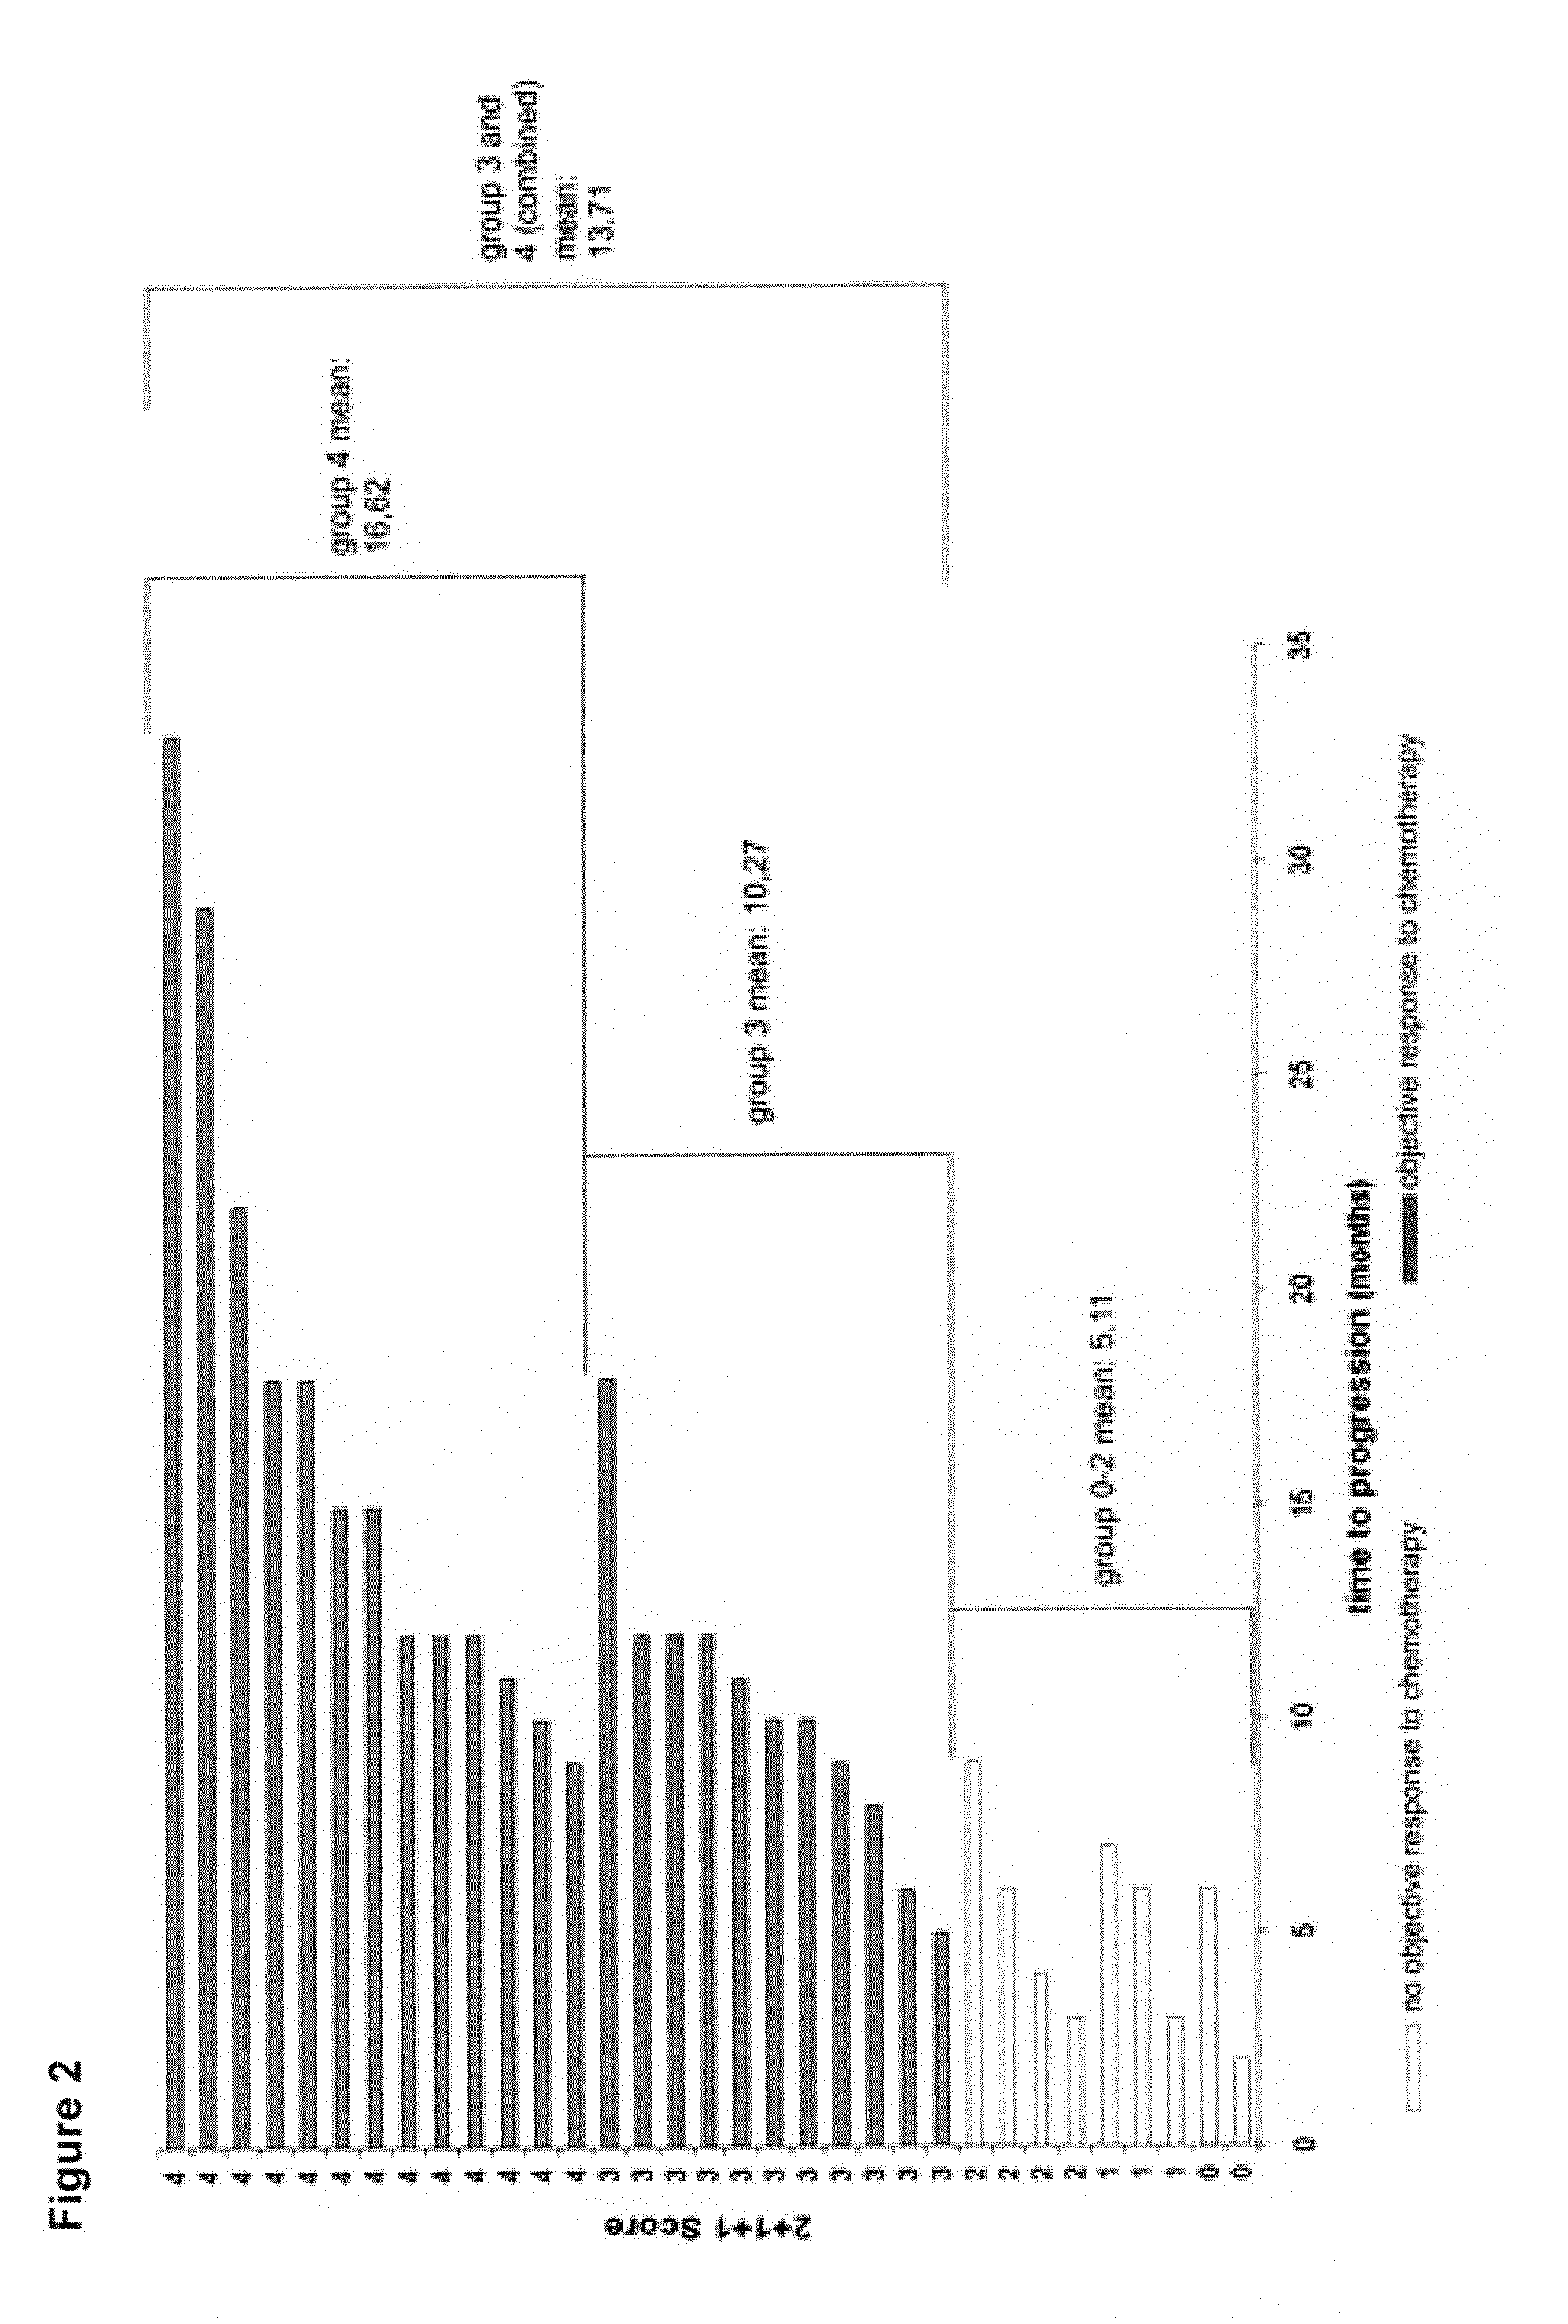 Means and methods for the prediction of treatment response of a cancer patient